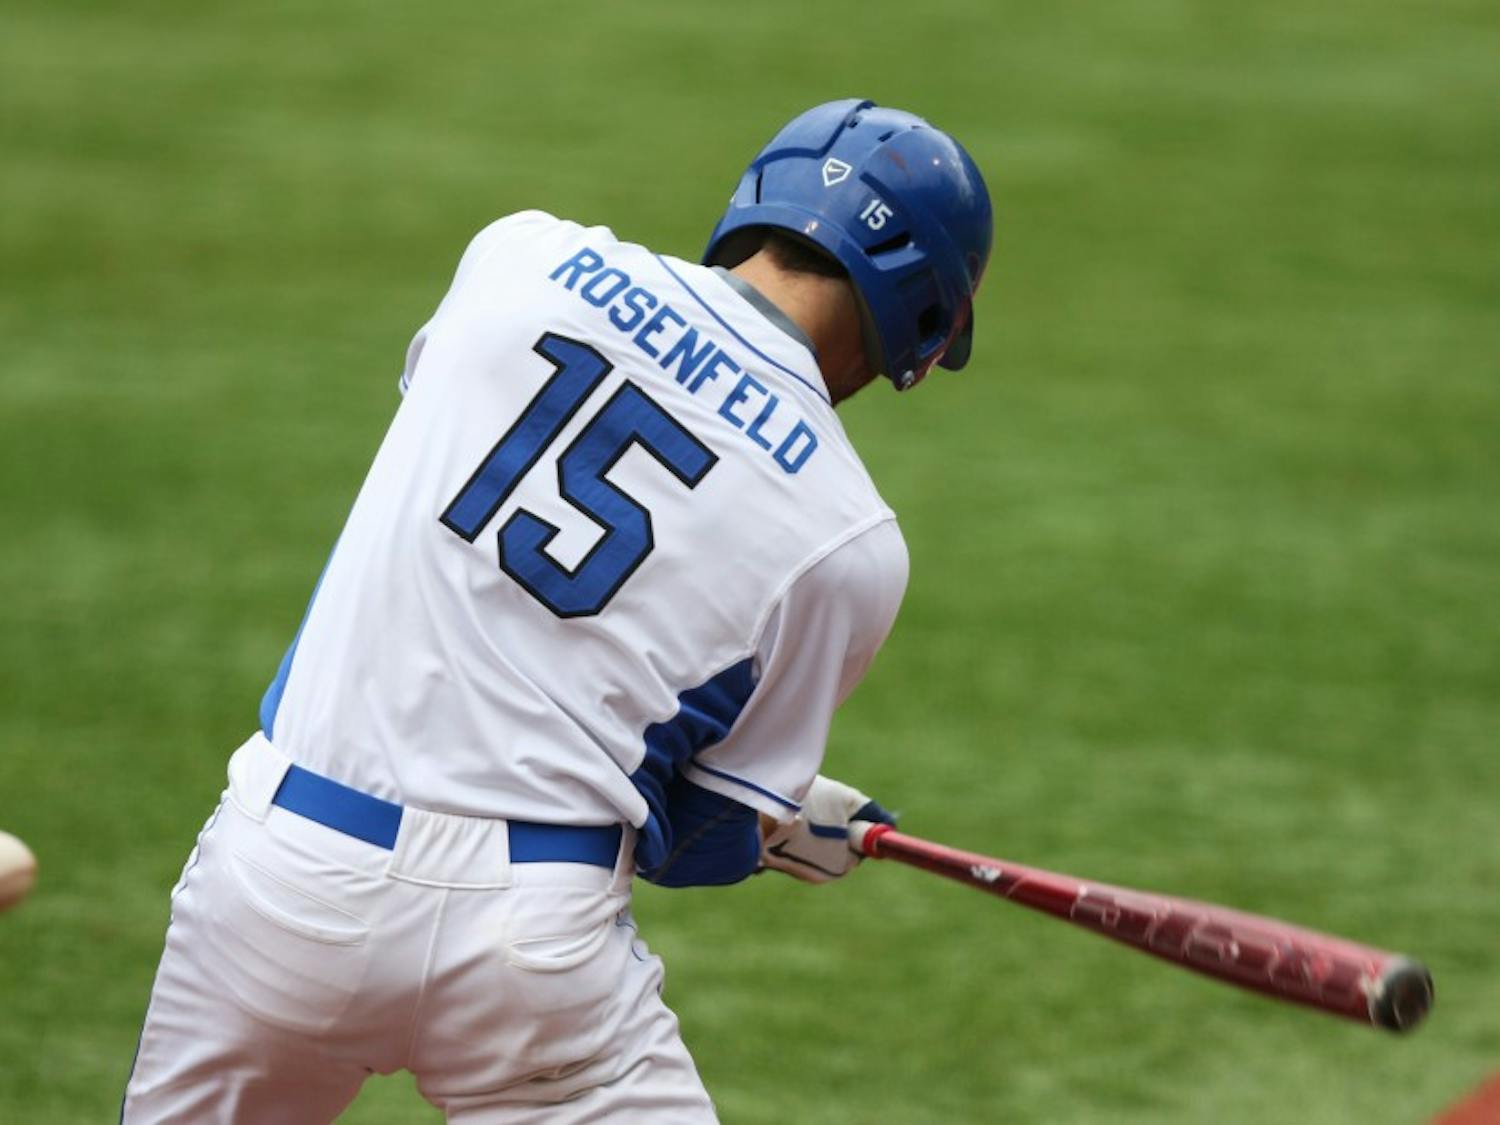 Redshirt senior catcher Mike Rosenfeld and the Blue Devils will play a doubleheader Sunday against the Eagles.